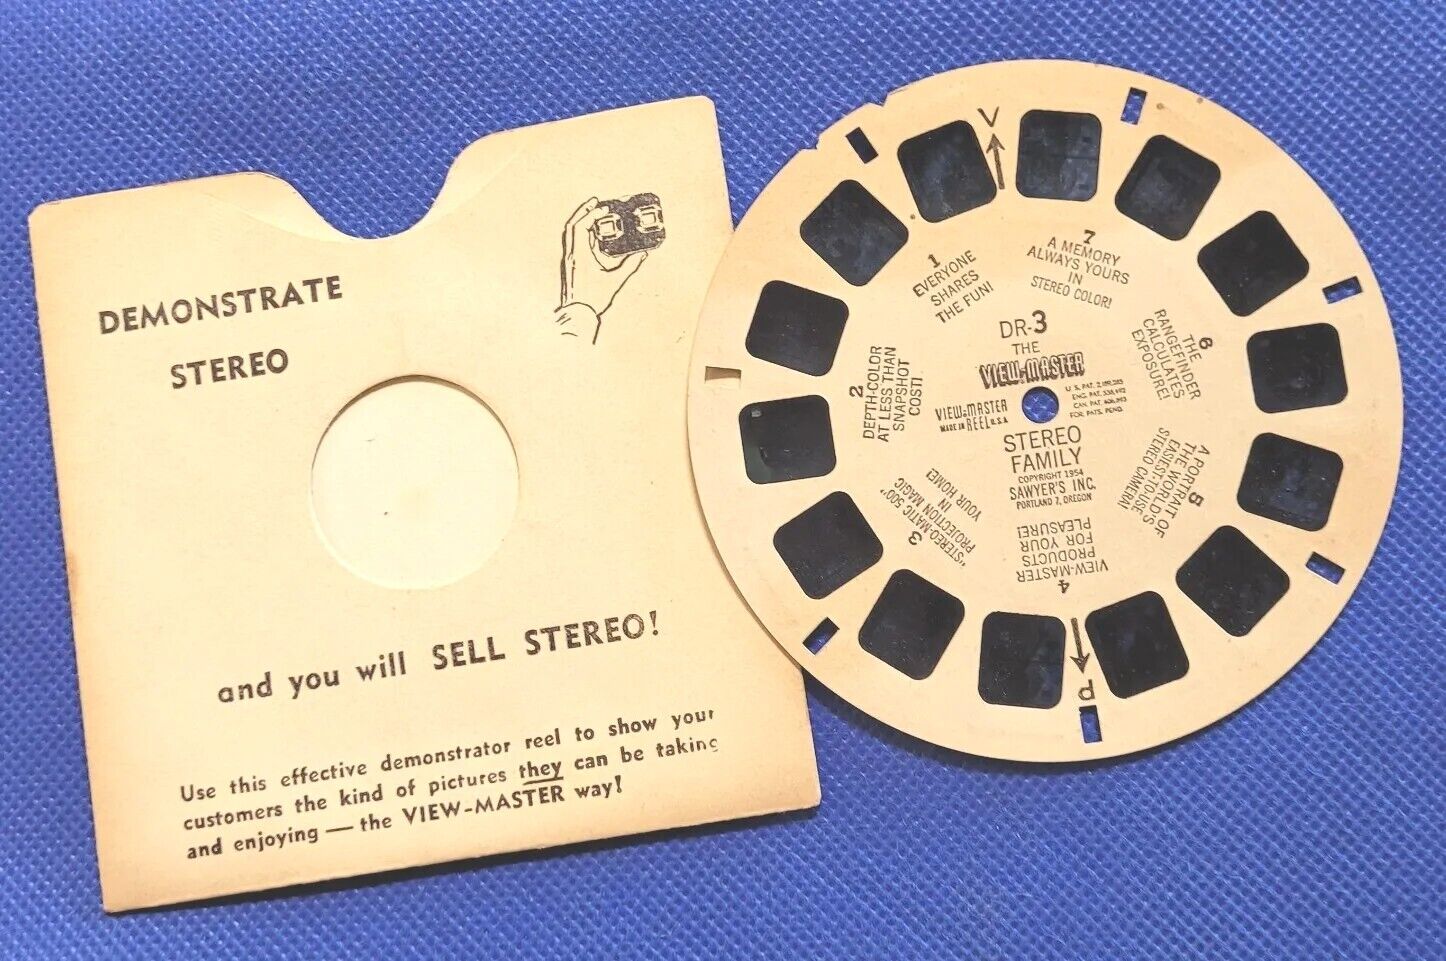 Sawyer's Single view-master Reel DR-3 The view-master Stereo Family 1954 Demo